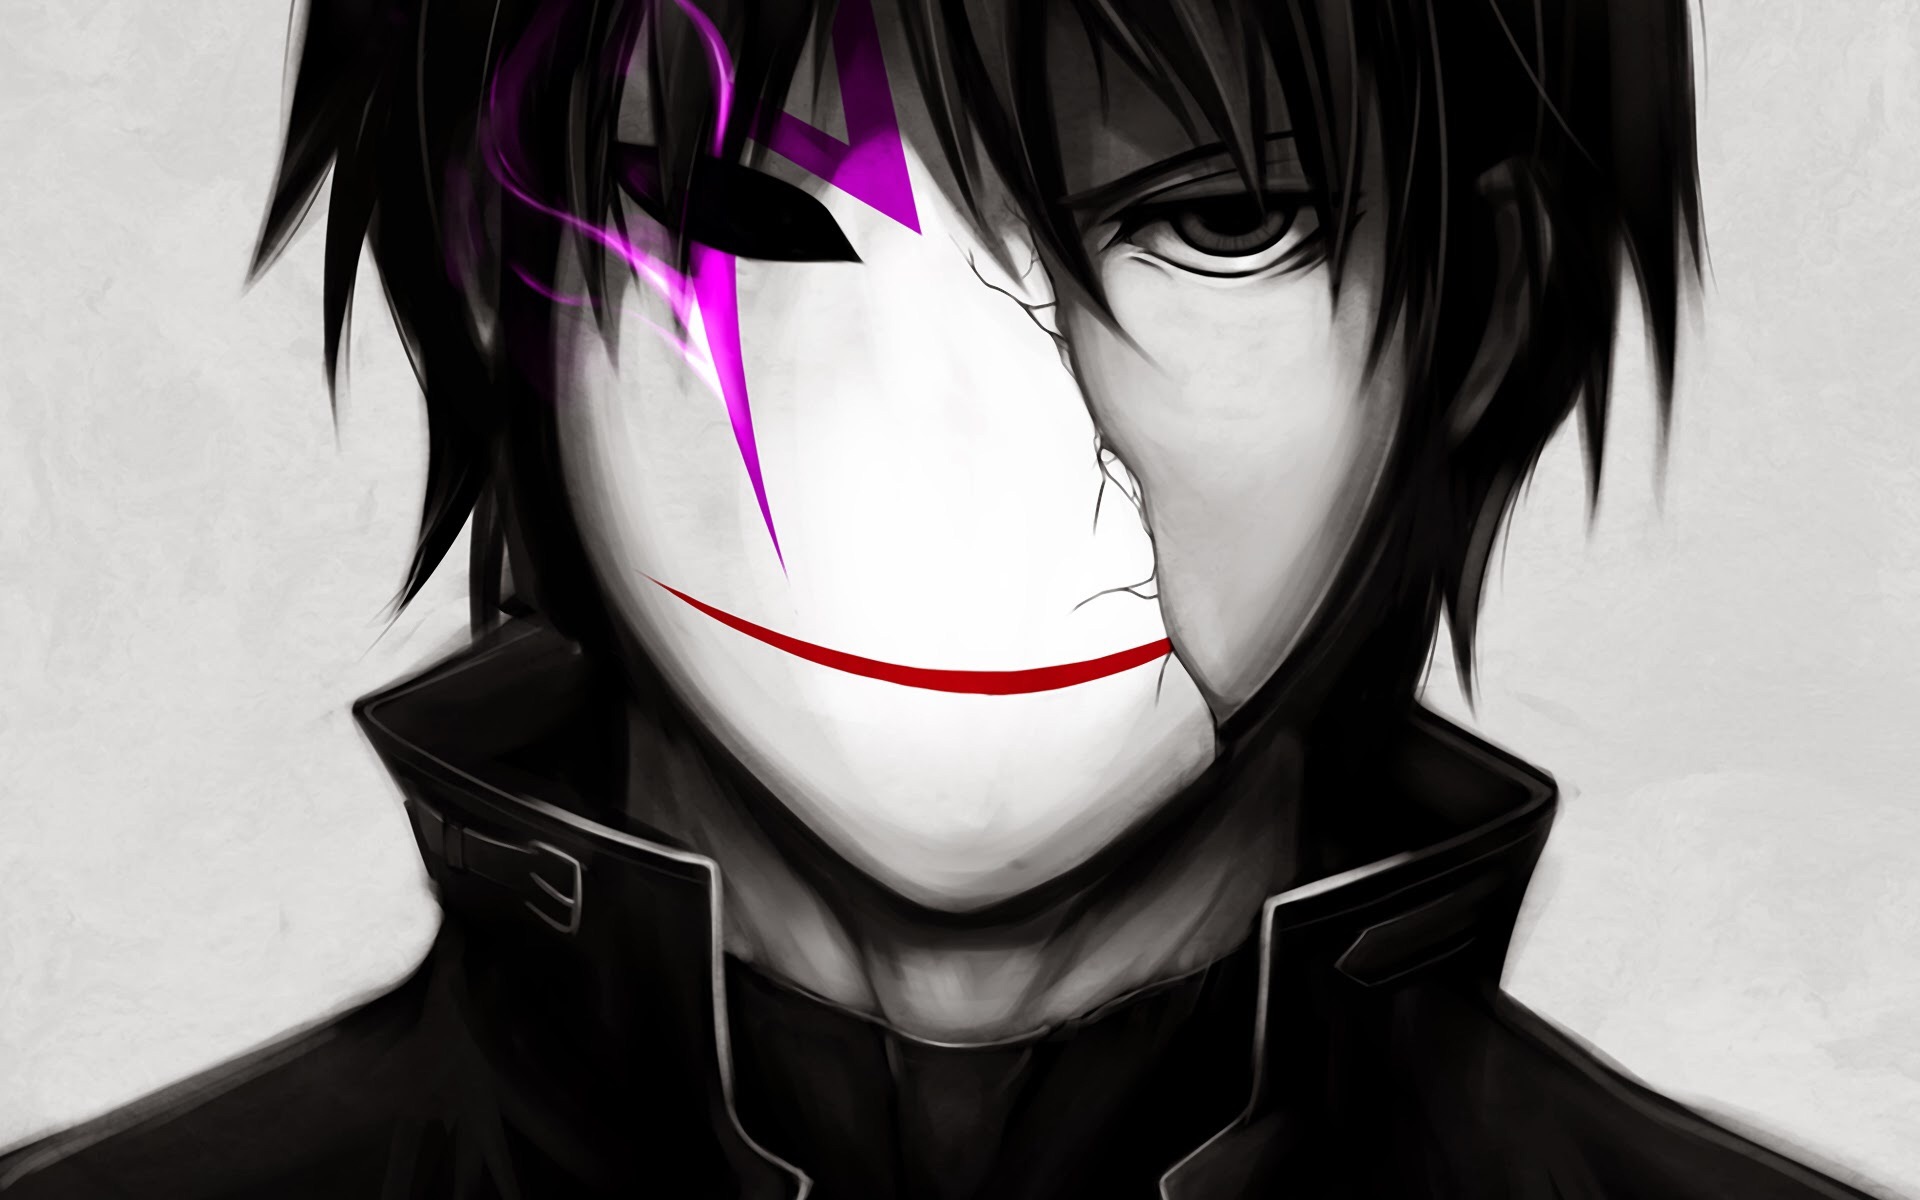 140+ Darker Than Black HD Wallpapers and Backgrounds